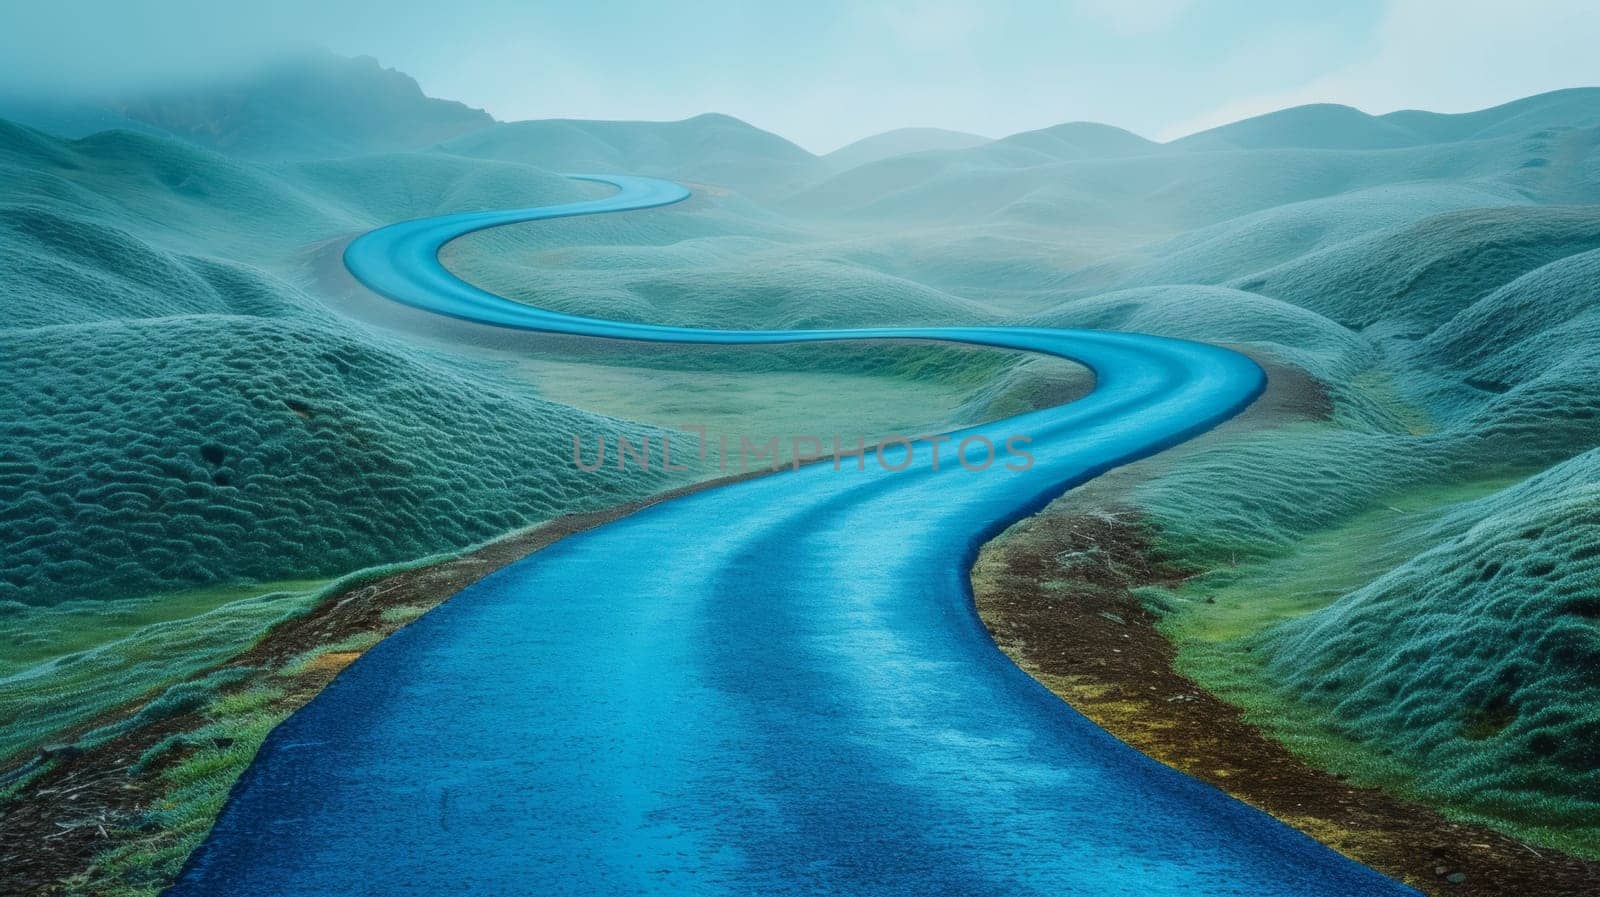 A blue road winding through a green landscape with mountains in the background